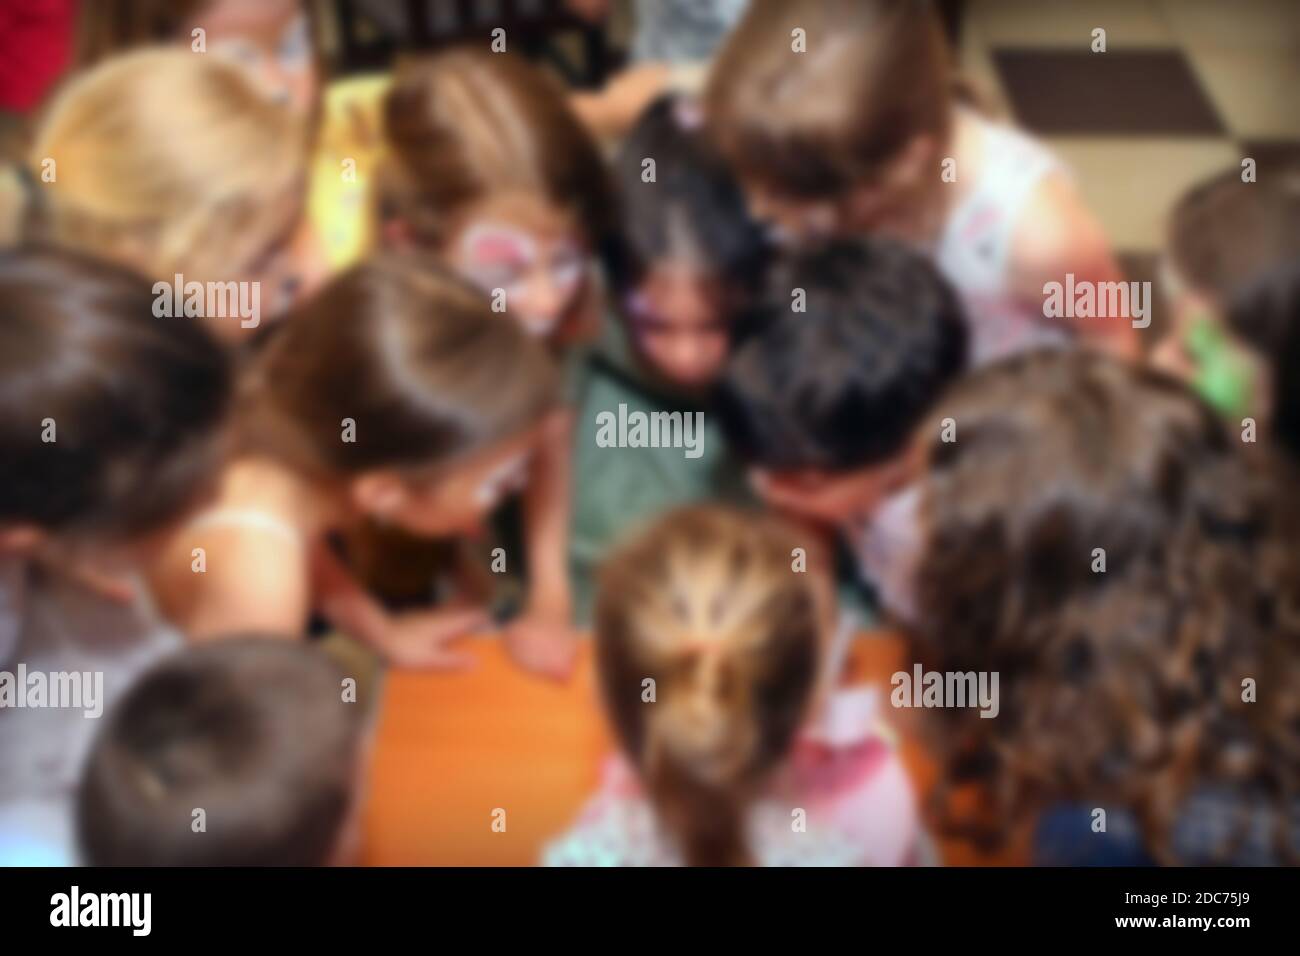 Kids gathered together and blowing candles at birthday party. Blurred image for background use. Stock Photo